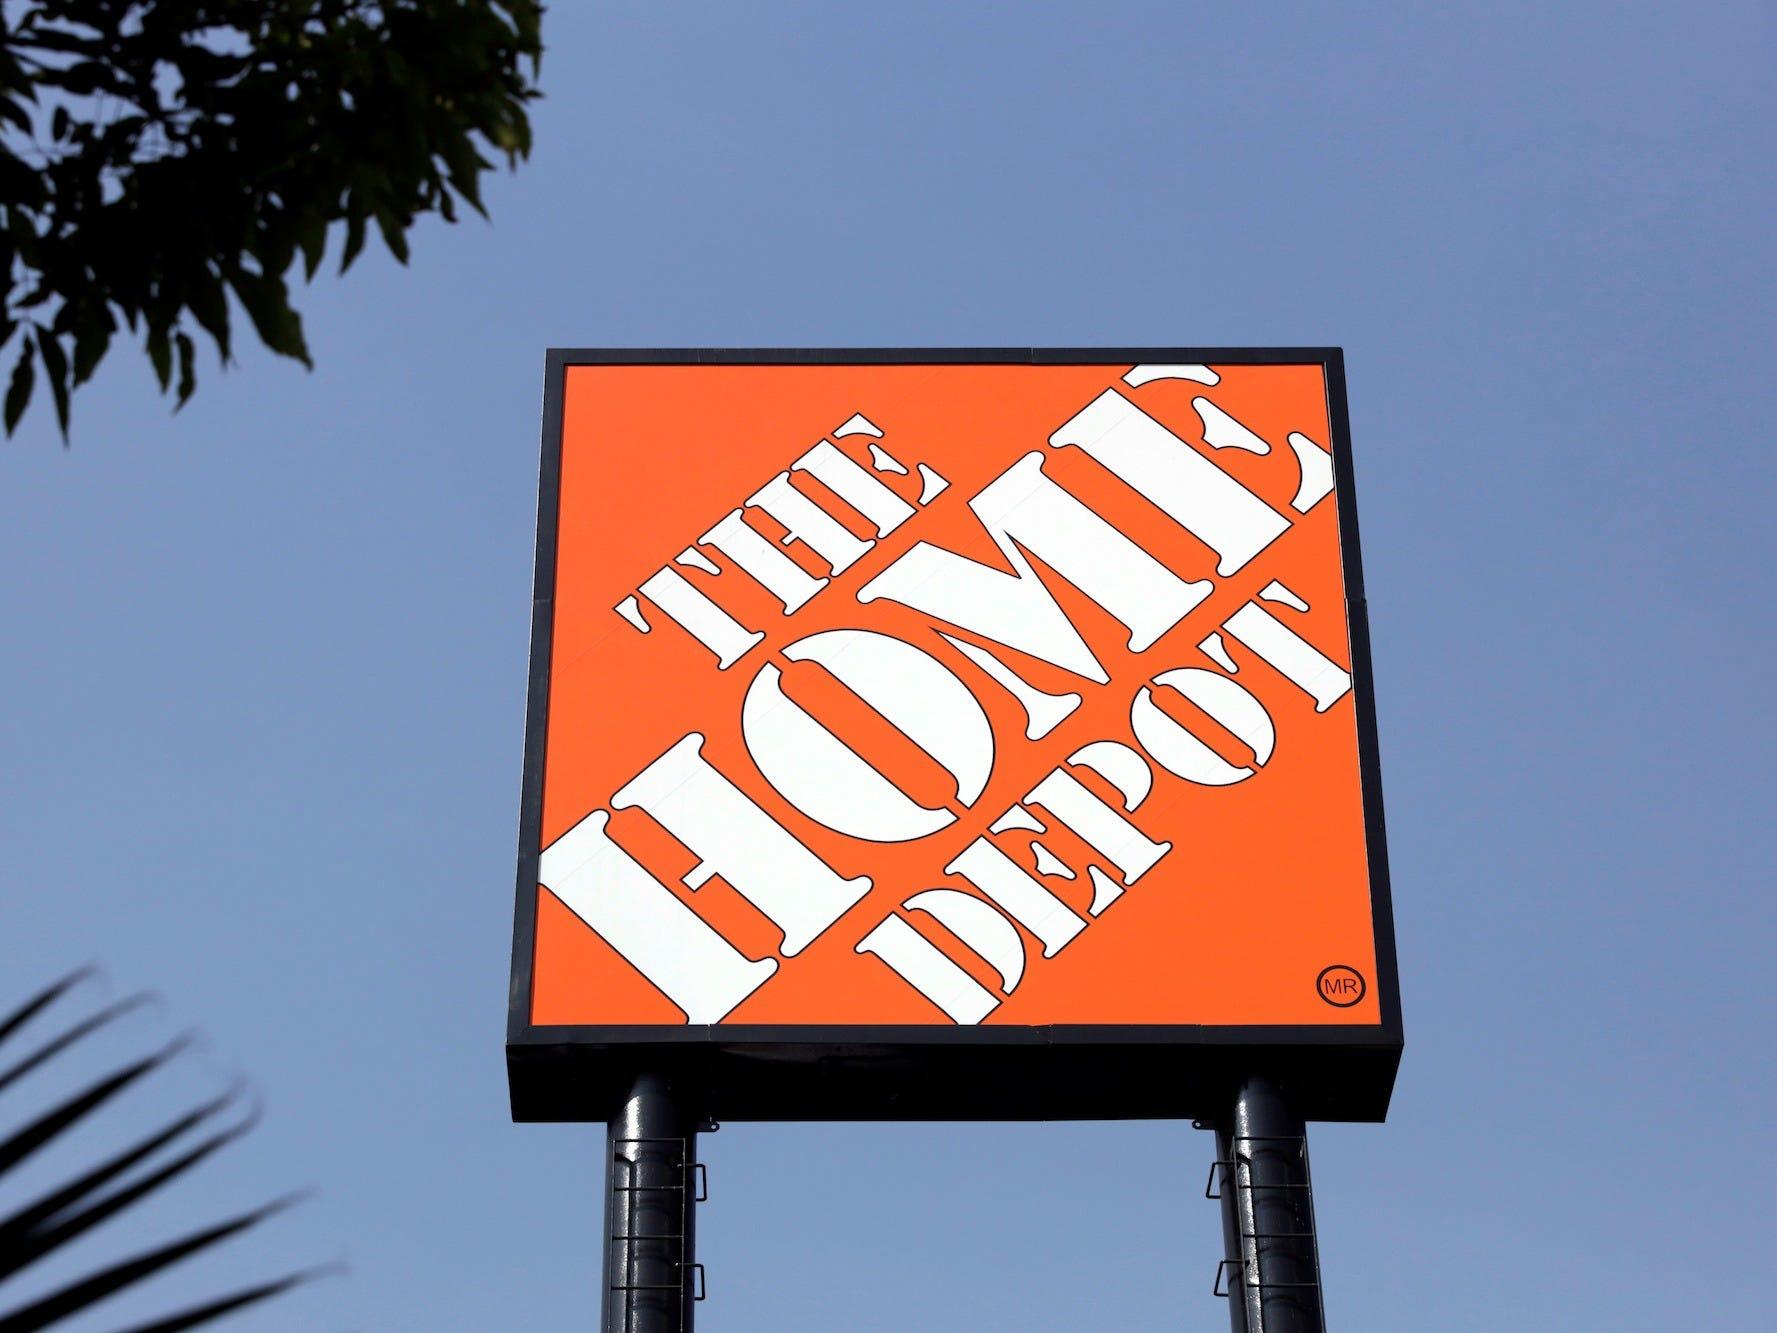 Home Depot Shoppers Fight Over Masks White Power Comment